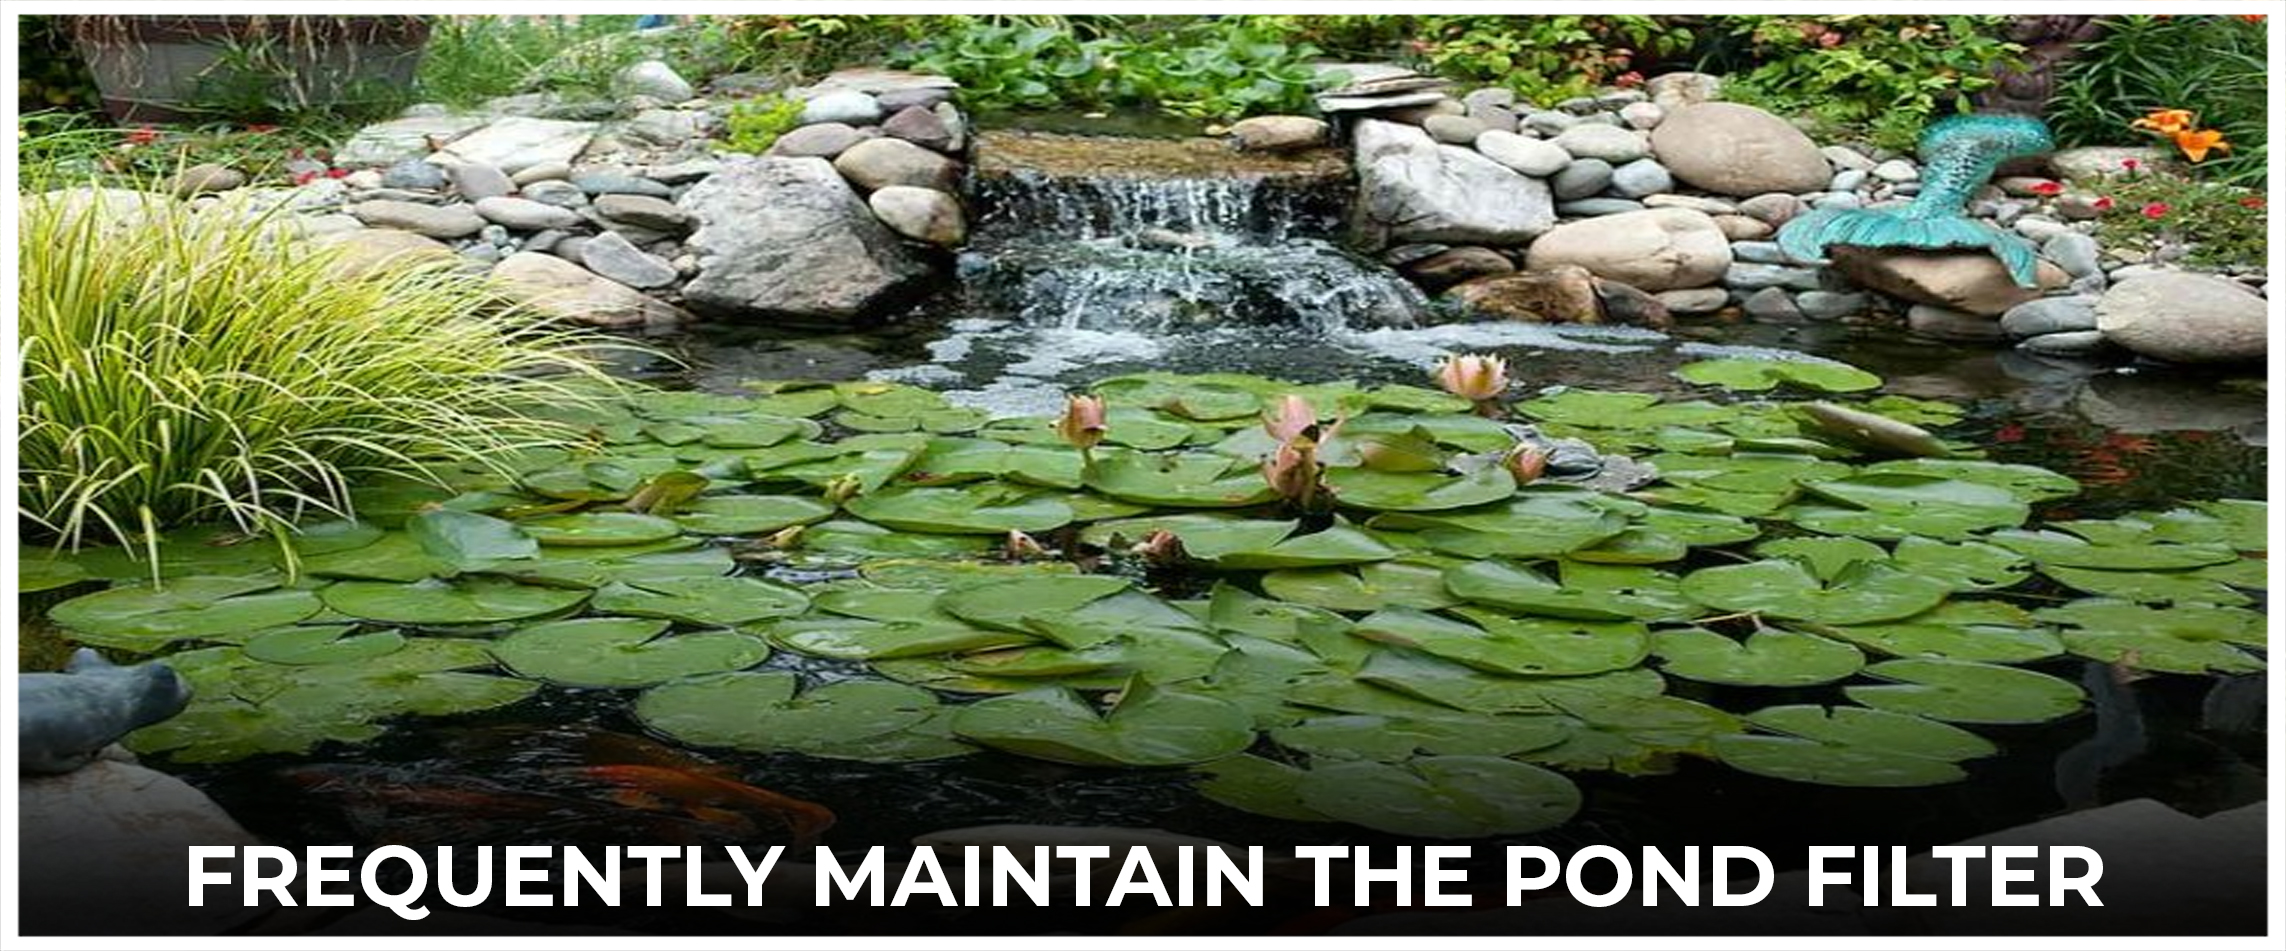  Frequently Maintain the Pond Filter